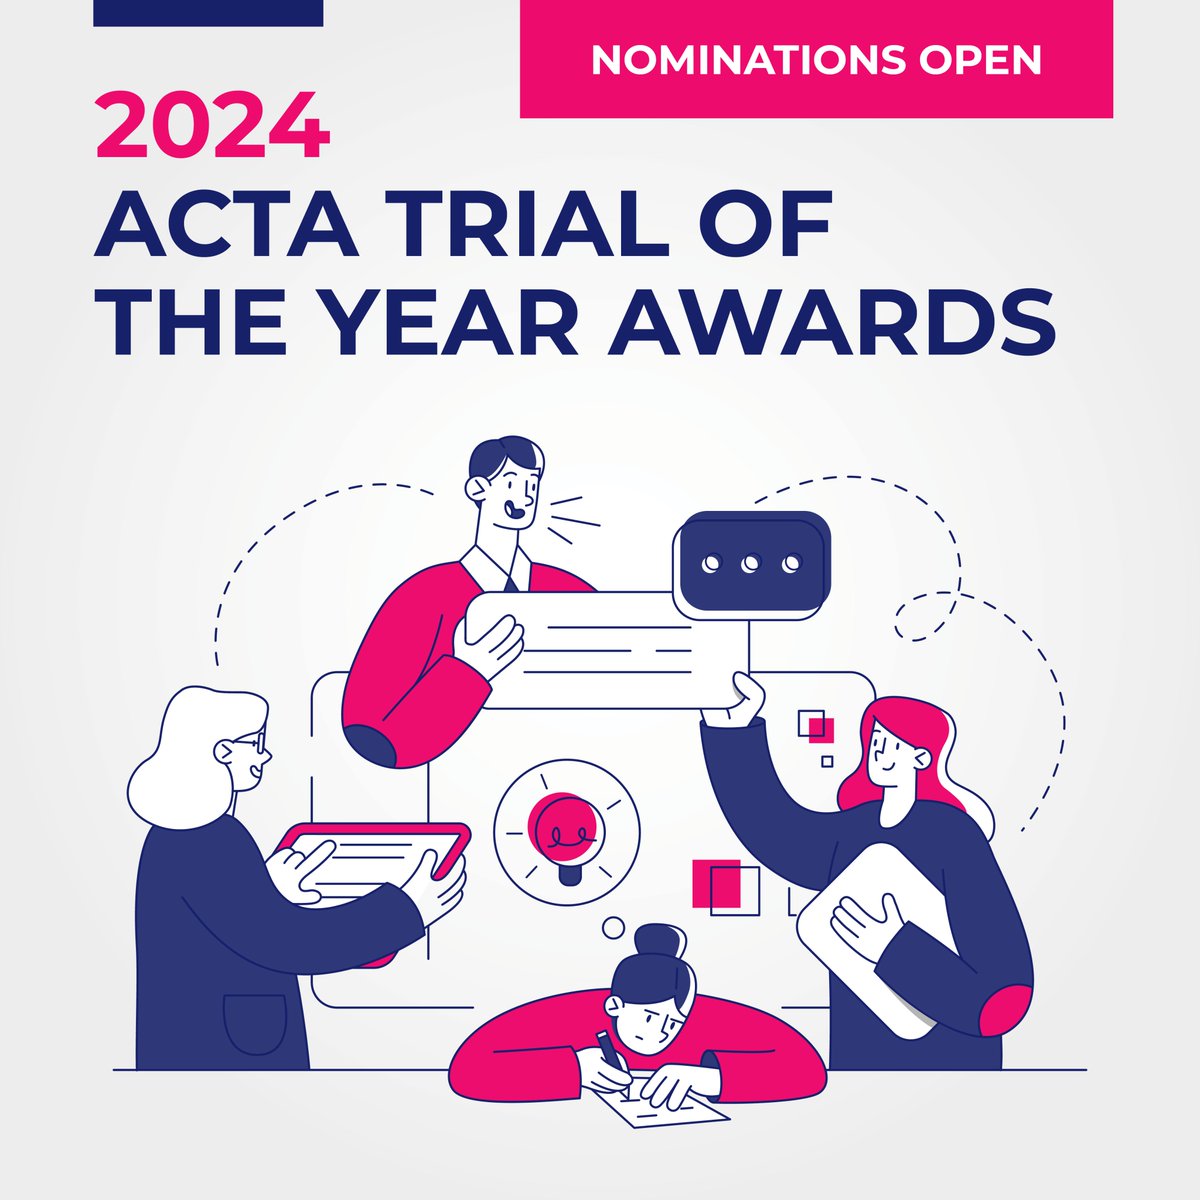 There's still time for you to nominate for the 2024 #ACTATrialOfTheYear Awards. 𝐍𝐨𝐦𝐢𝐧𝐚𝐭𝐢𝐨𝐧𝐬 𝐜𝐥𝐨𝐬𝐞 𝐨𝐧 𝐅𝐫𝐢𝐝𝐚𝐲, 𝟐𝟗 𝐌𝐚𝐫𝐜𝐡 𝟐𝟎𝟐𝟒. To nominate and learn more, visit the ACTA website: bit.ly/TOTY-Awards